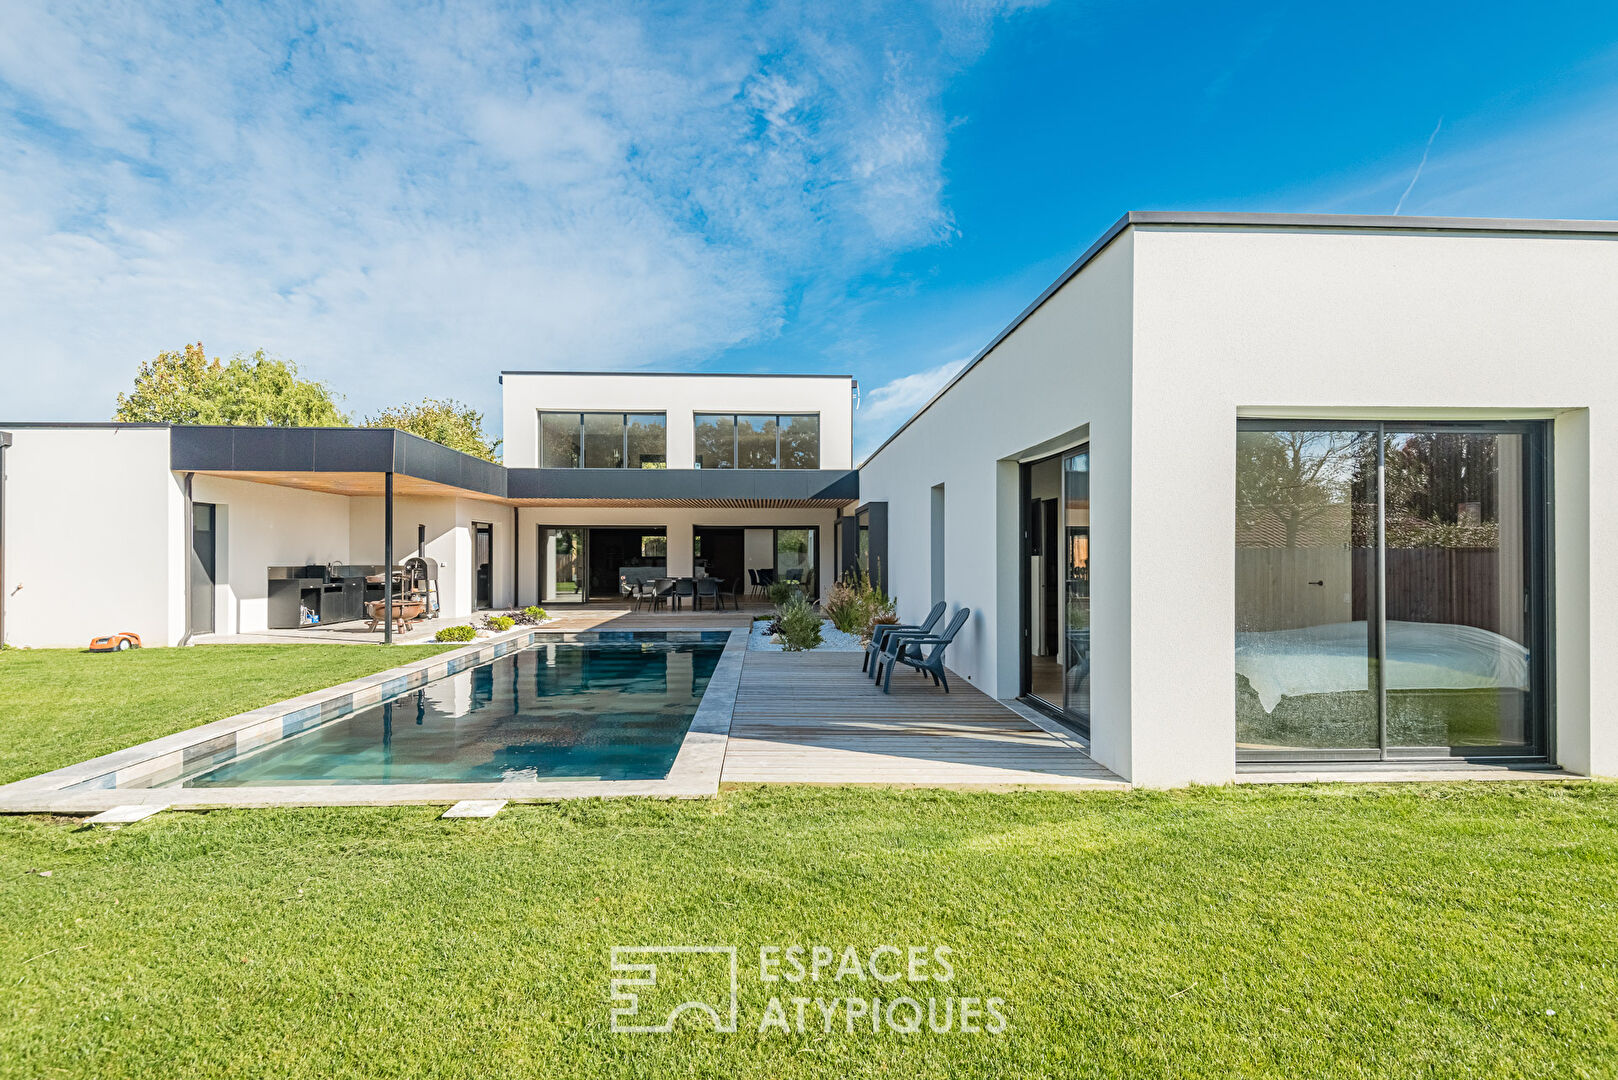 Villa with contemporary lines with swimming pool